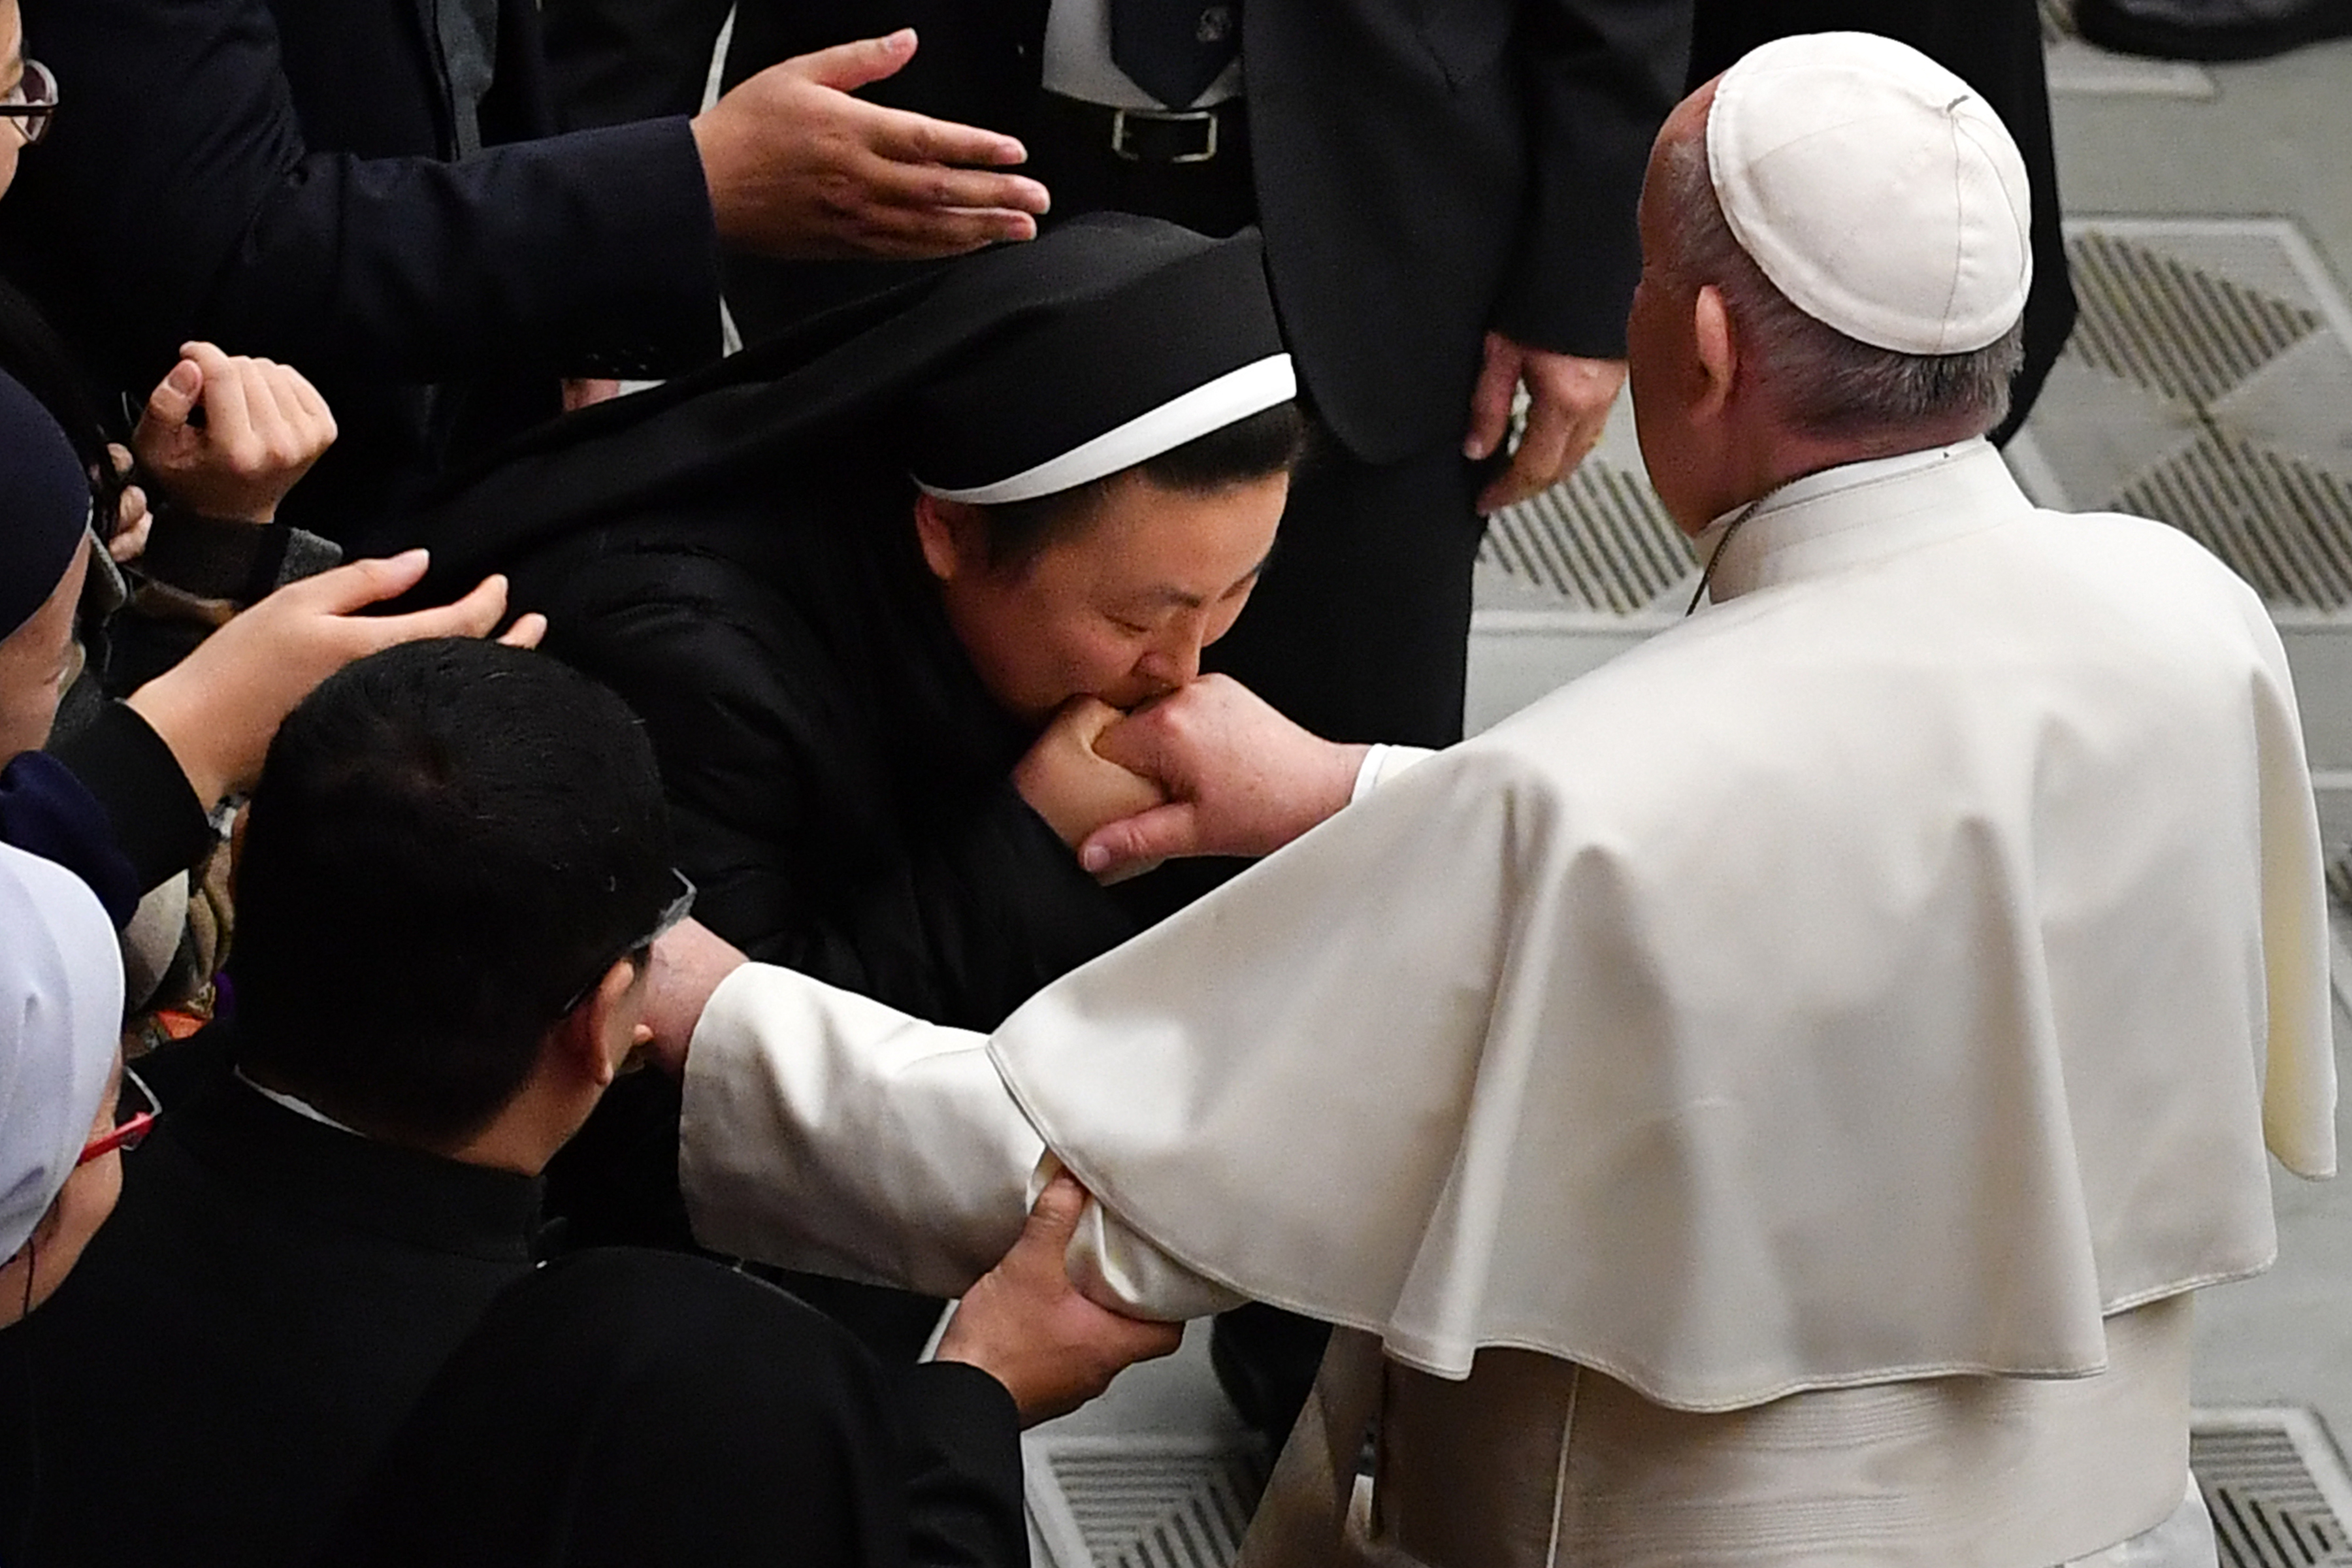 An Asian nun kisses Pope Francis' hand during the weekly general audience on February 6, 2019 at Paul-VI hall in the Vatican. (ANDREAS SOLARO/AFP/Getty Images)